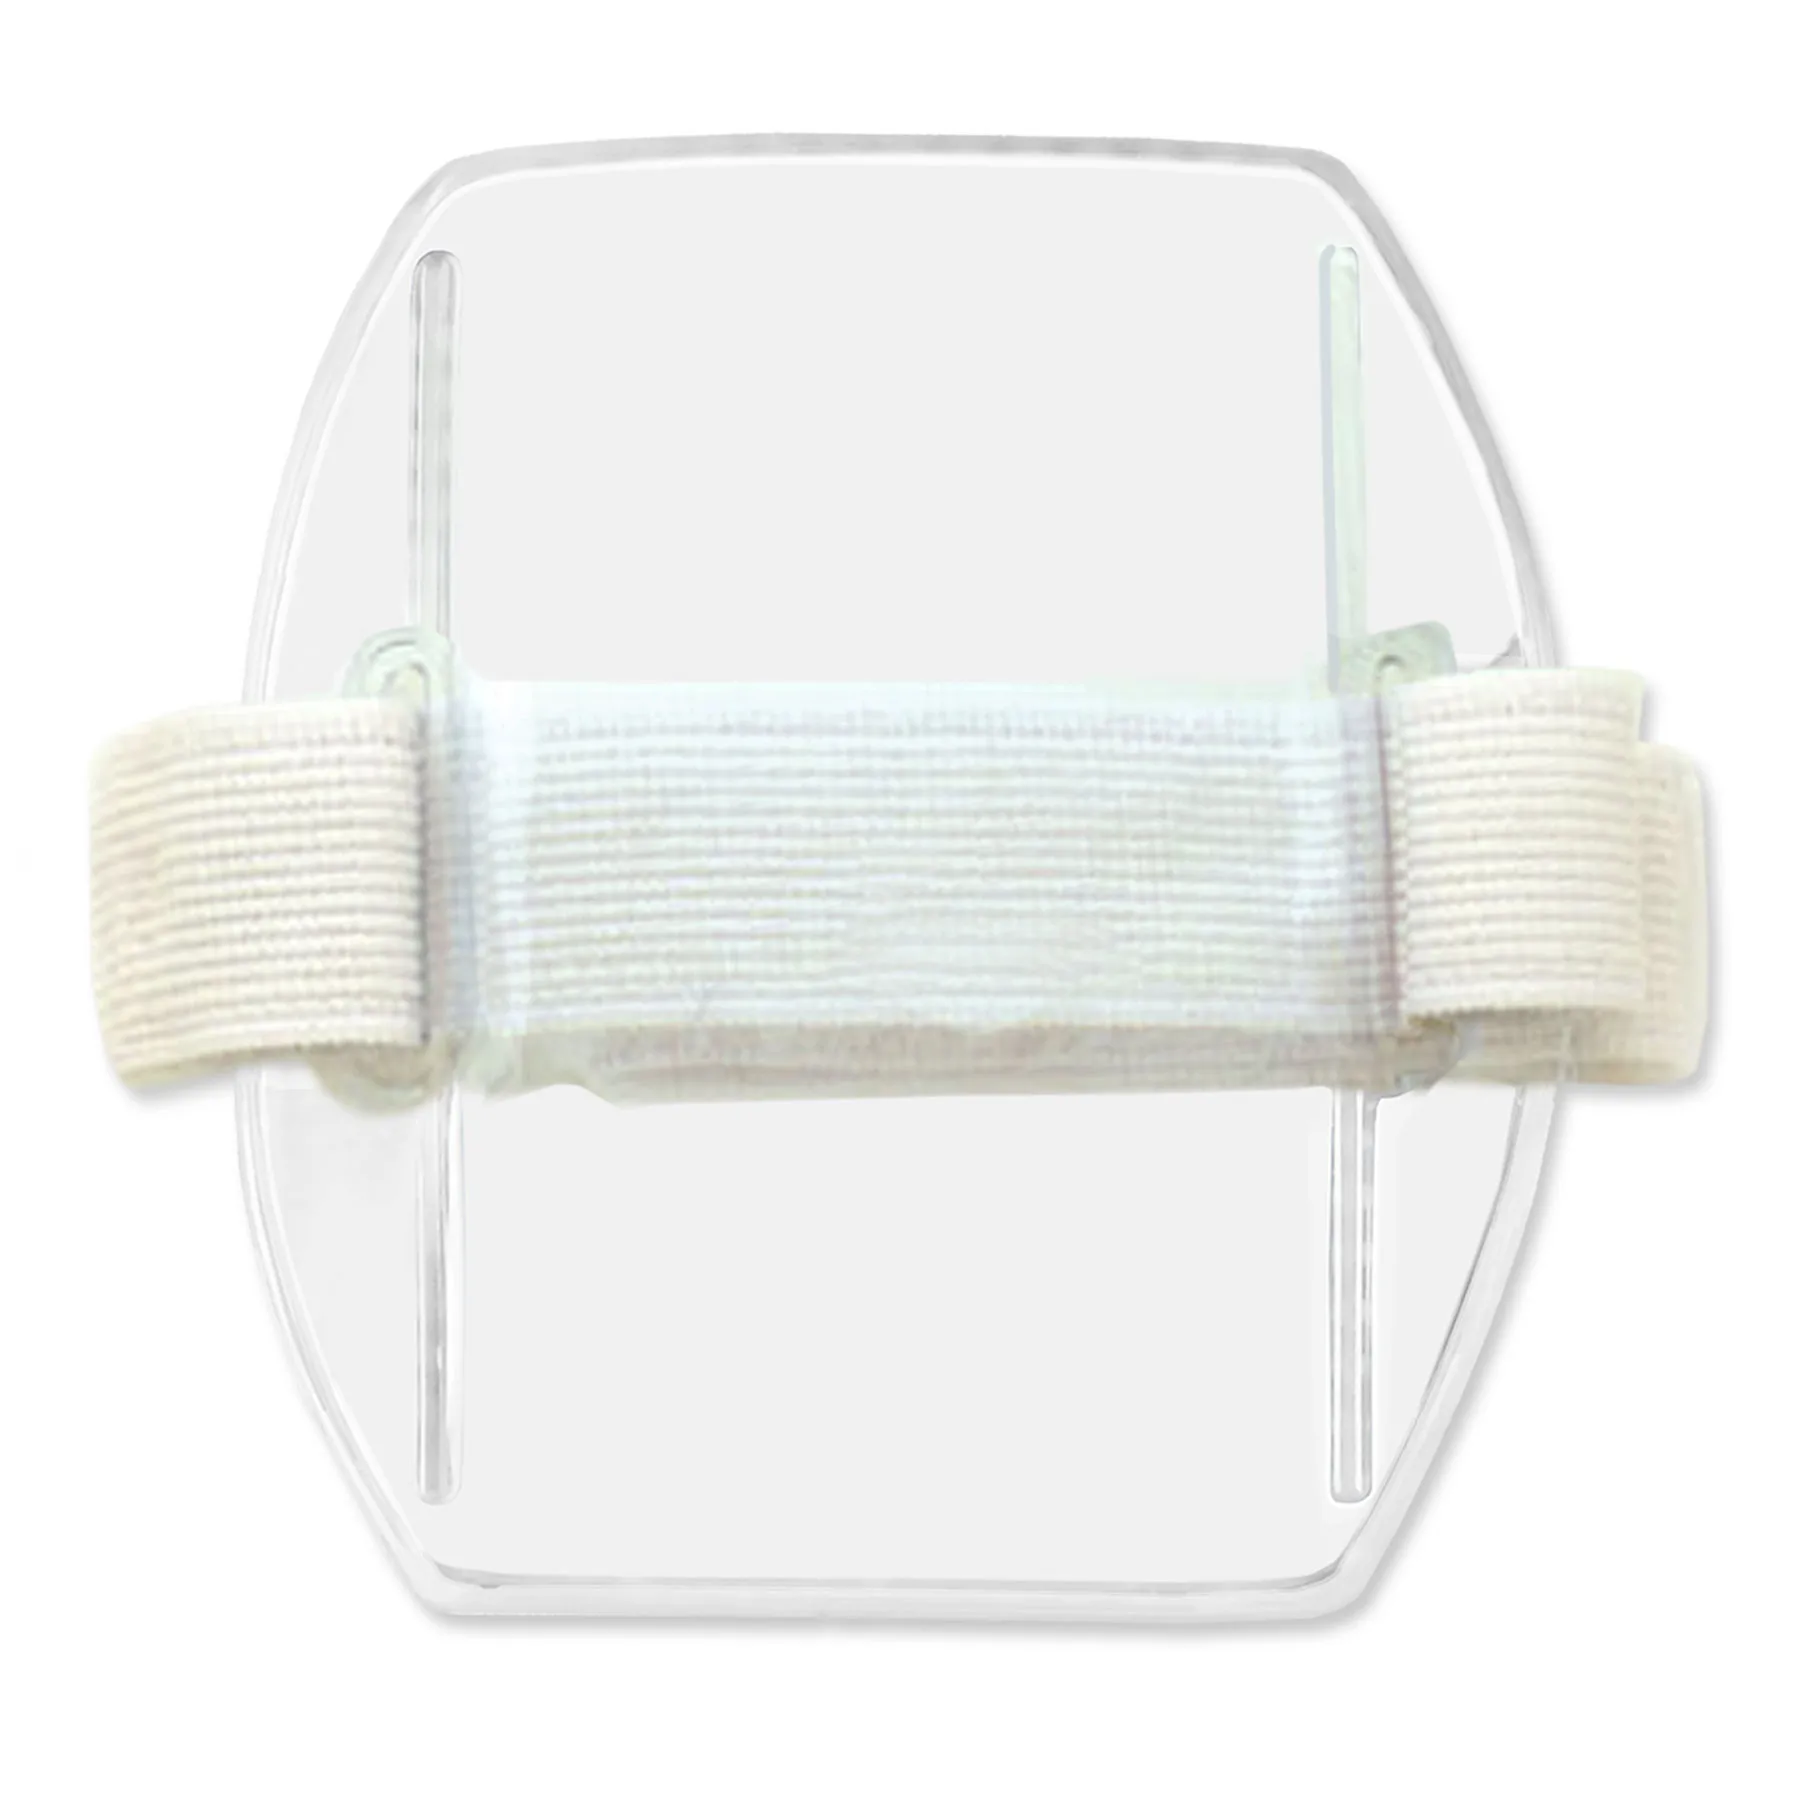 Clear Vertical Arm Band Badge Holder w/ White Strap, 2.38″ x 3.38″ – Pack of 100